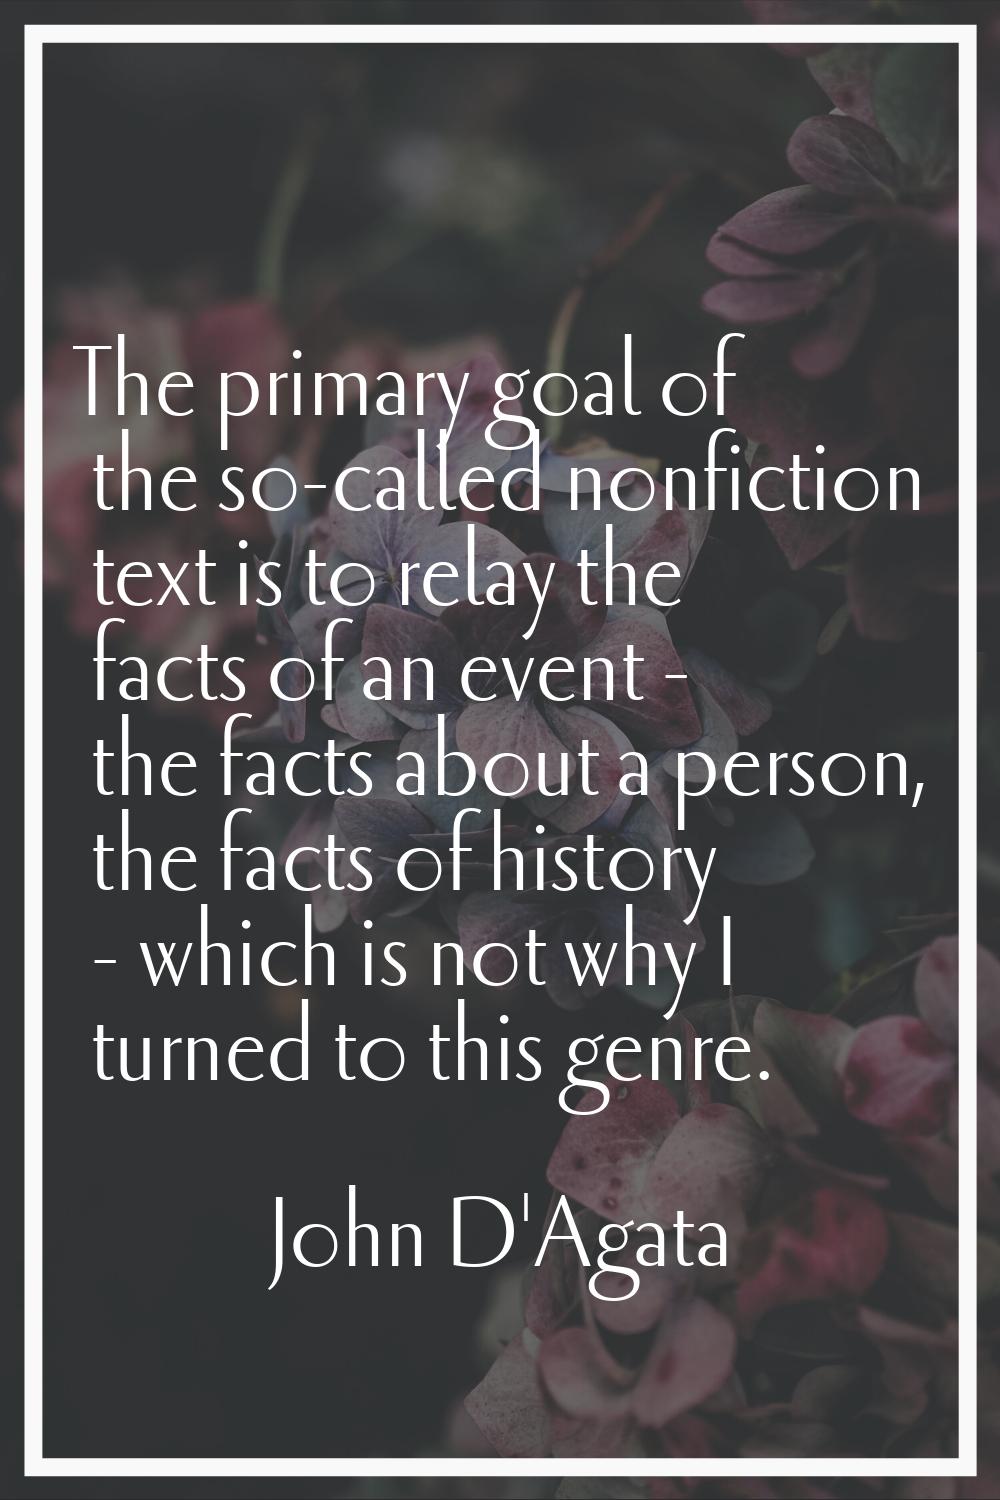 The primary goal of the so-called nonfiction text is to relay the facts of an event - the facts abo